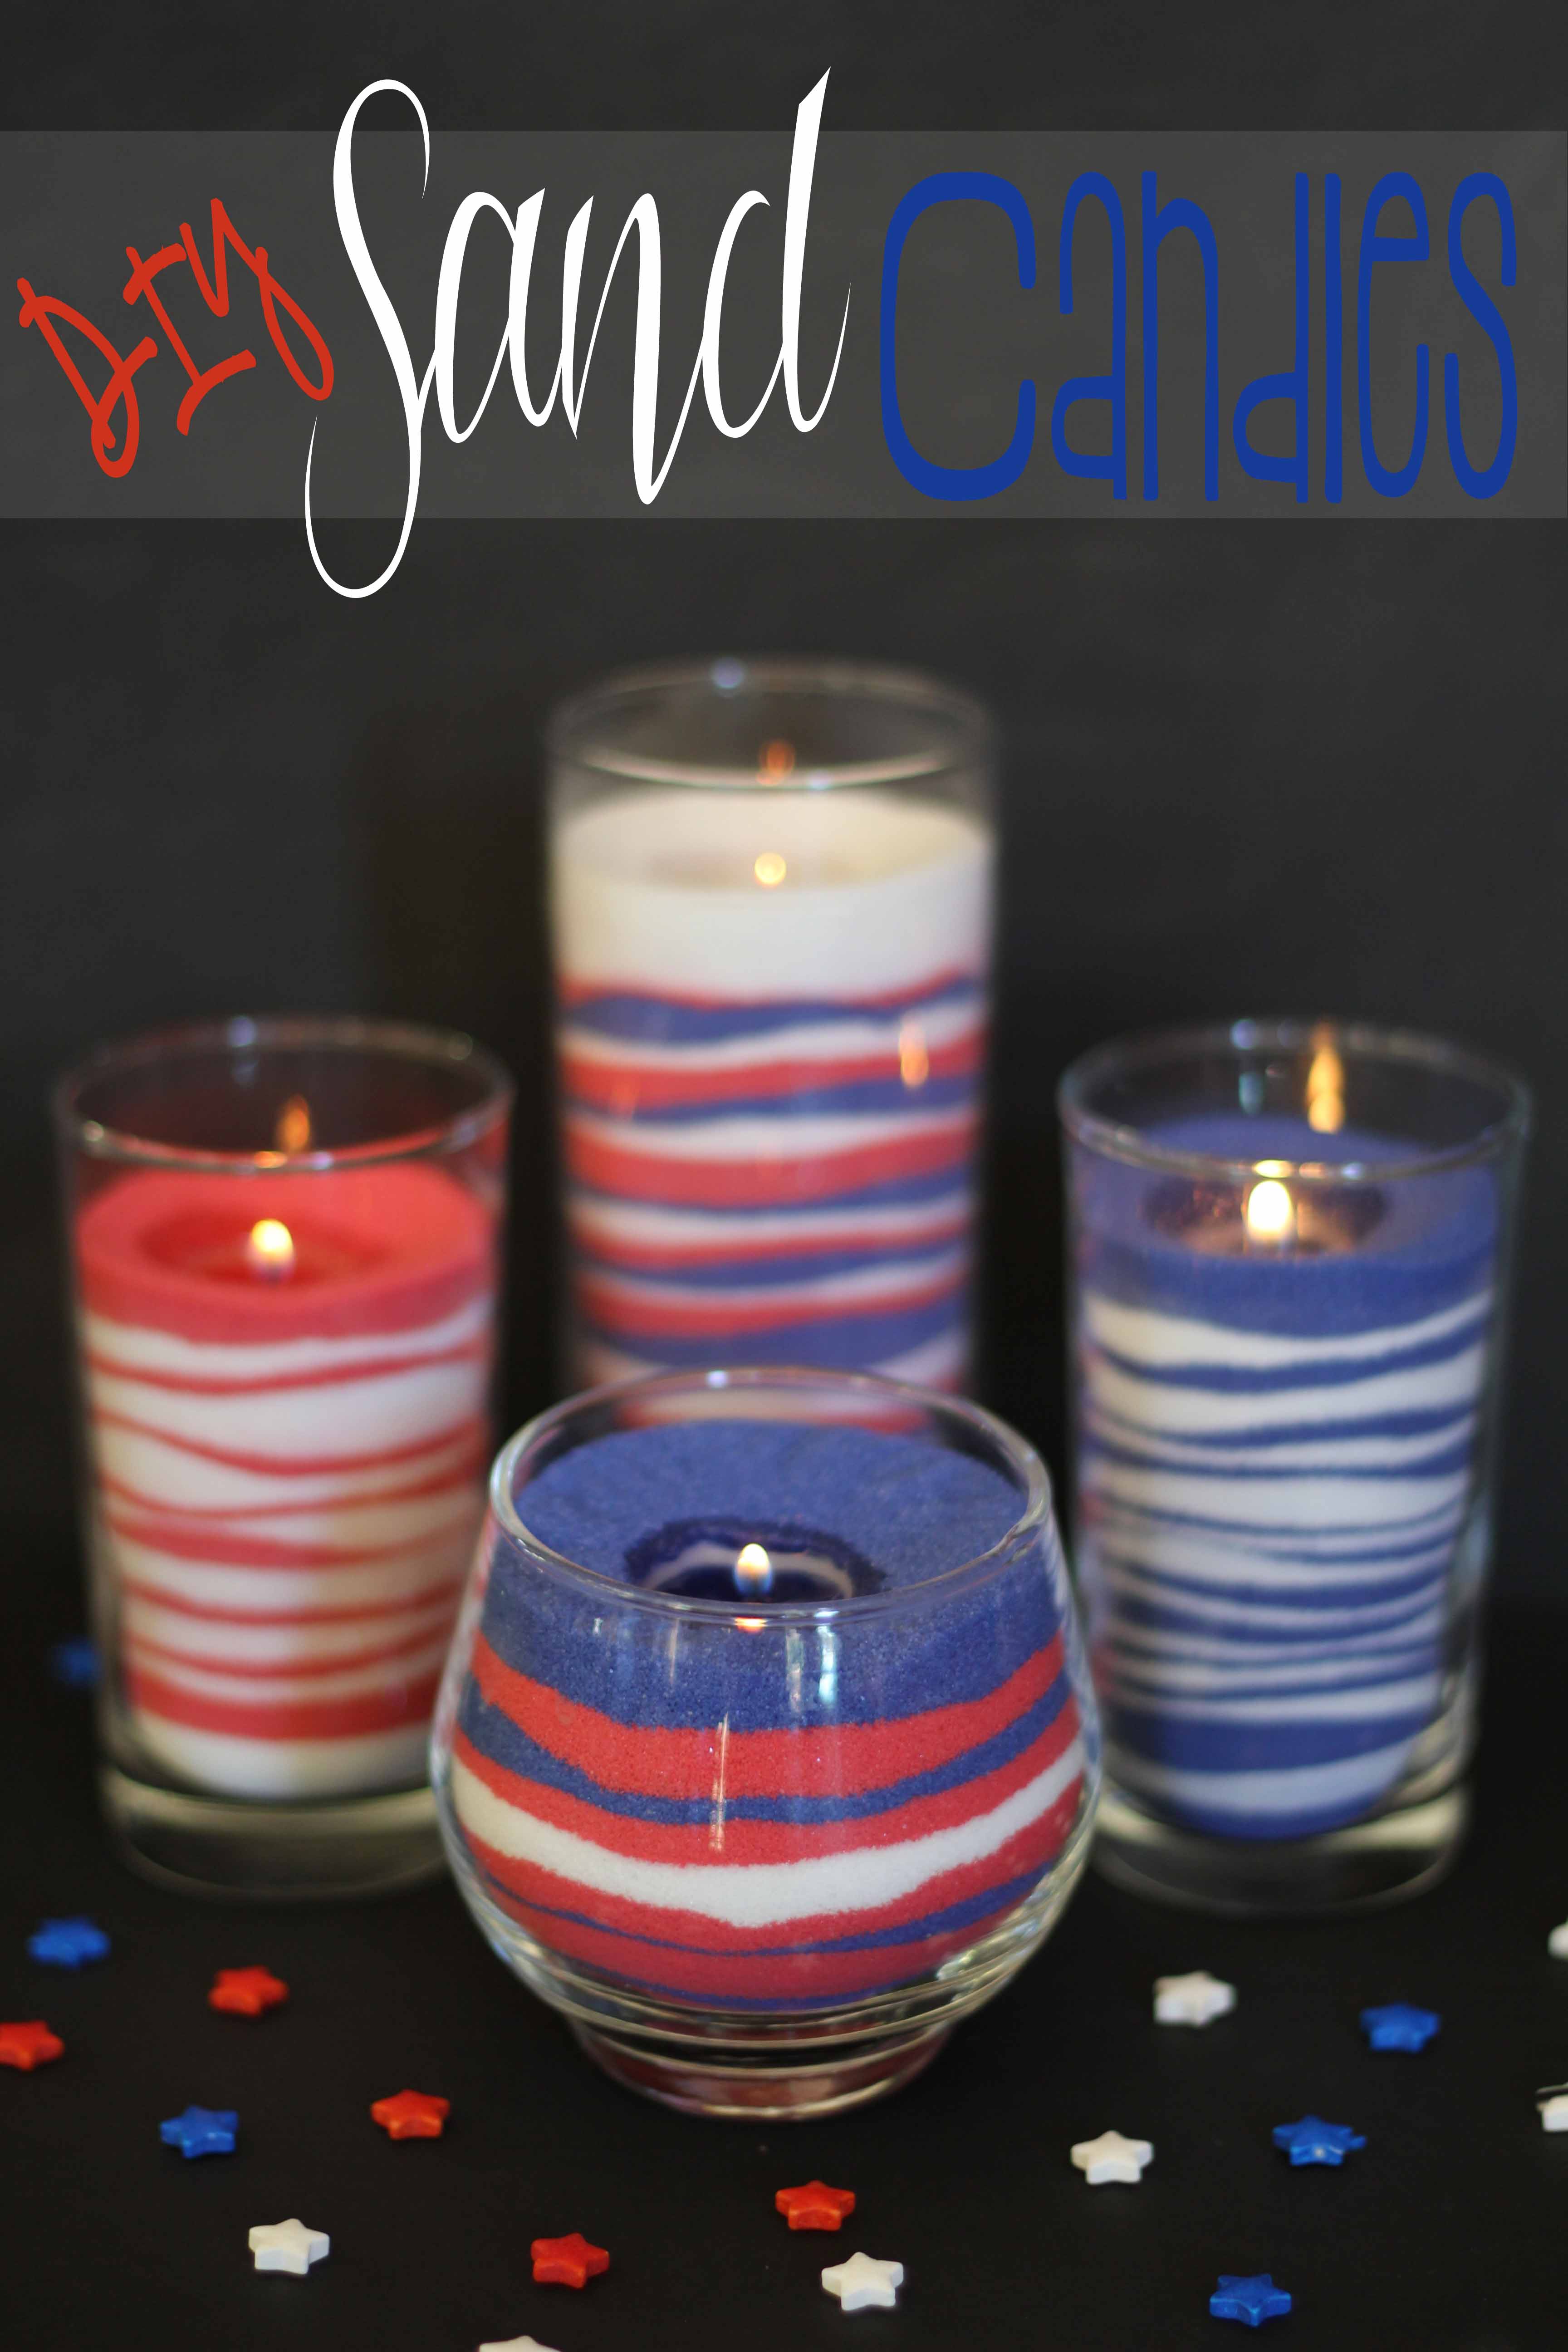 #DIY Sand Candles - I love these! I used drinking glasses and a votive I bought from a thrift store, added the #sand and a tea #candle. 30 minutes later I have 4 great candles for #4th of July. Made all four candles for $8 bucks! This pin was tested and reviewed by one of the 3 crazy sisters at https://madefrompinterest.net/